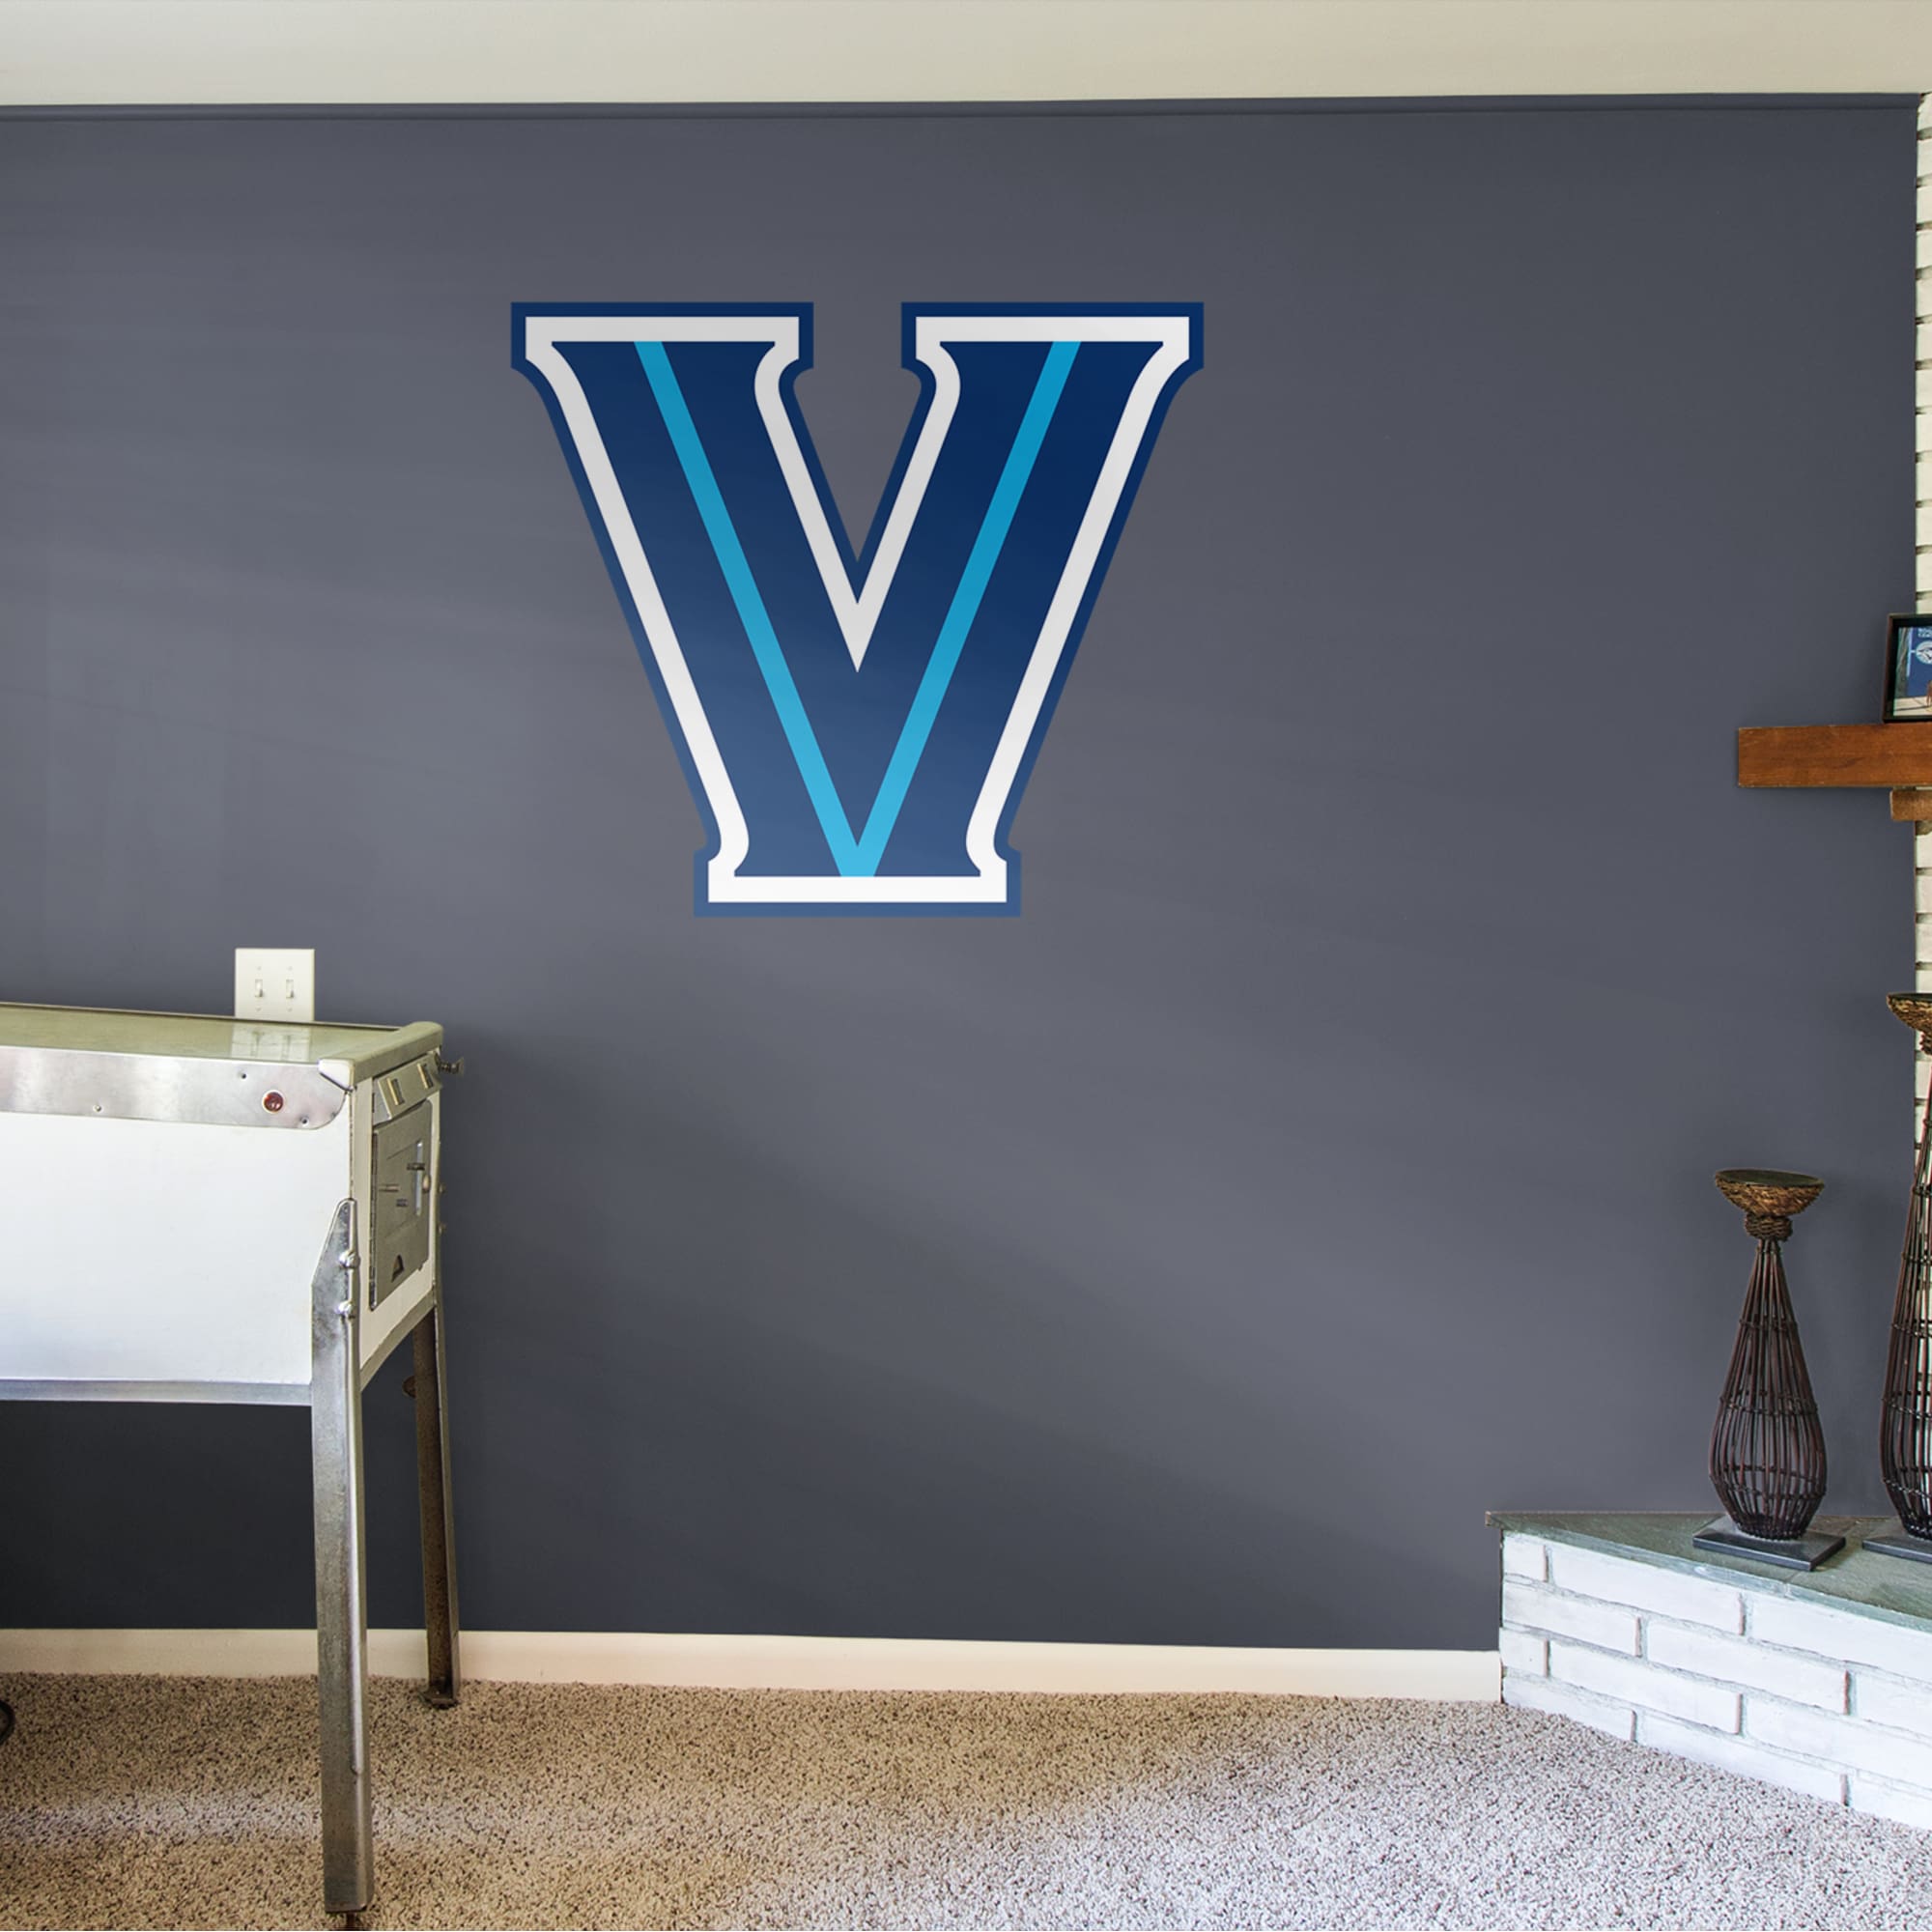 Villanova Wildcats: Logo - Officially Licensed Removable Wall Decal 42.0"W x 38.0"H by Fathead | Vinyl